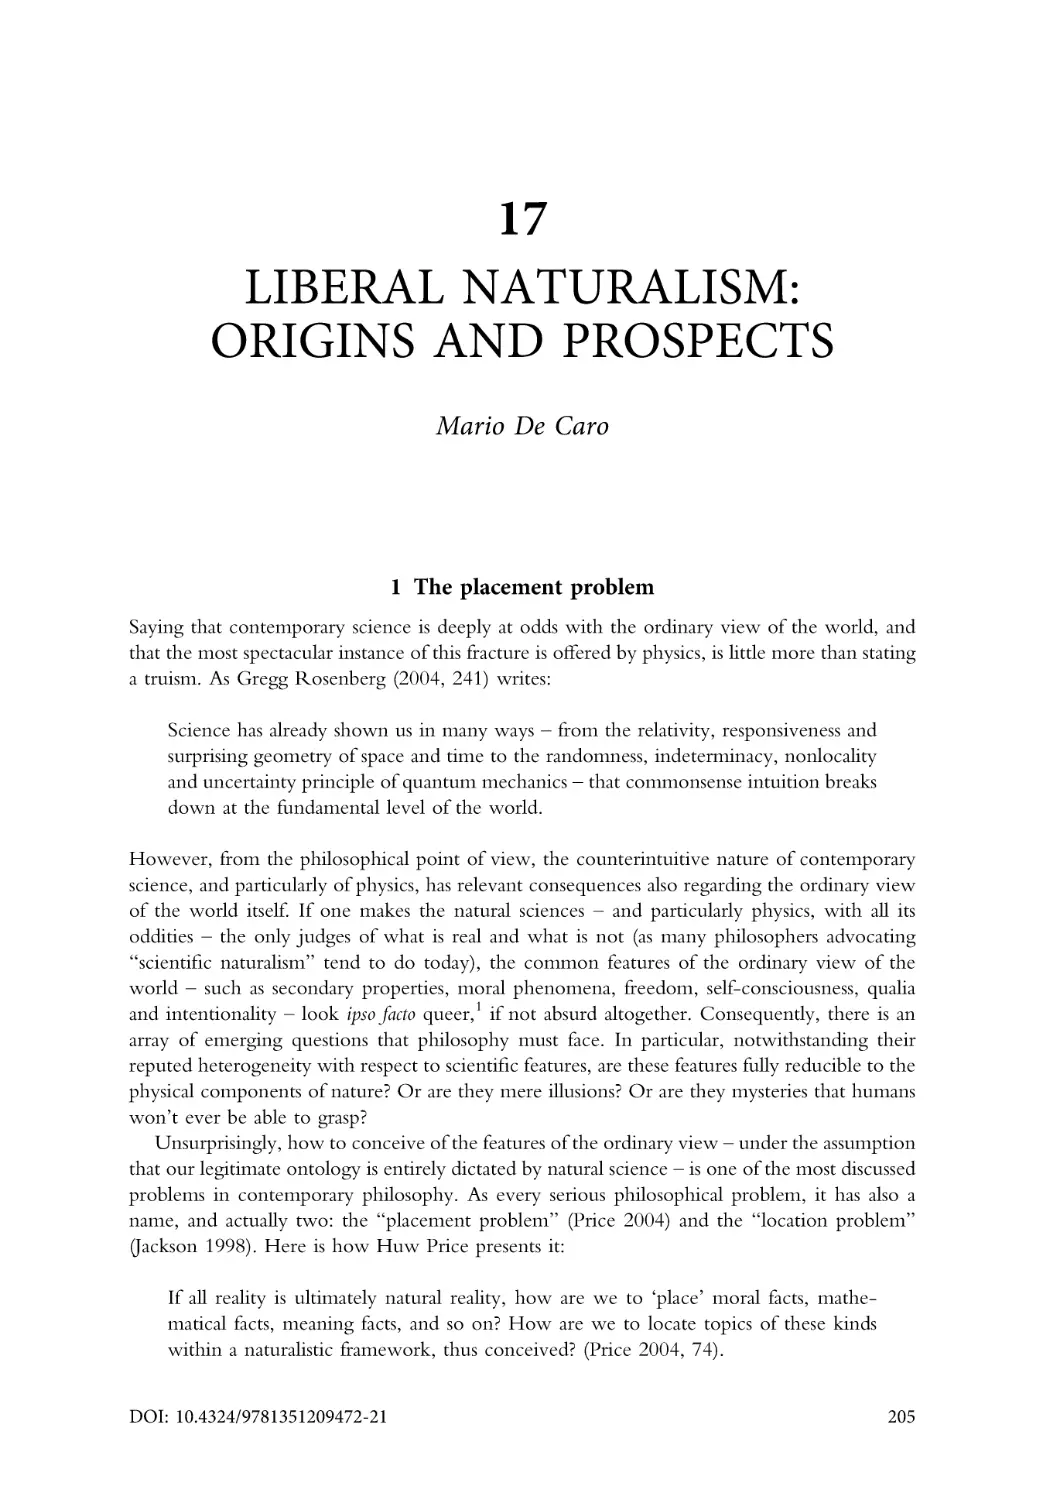 17. Liberal naturalism
1. The placement problem